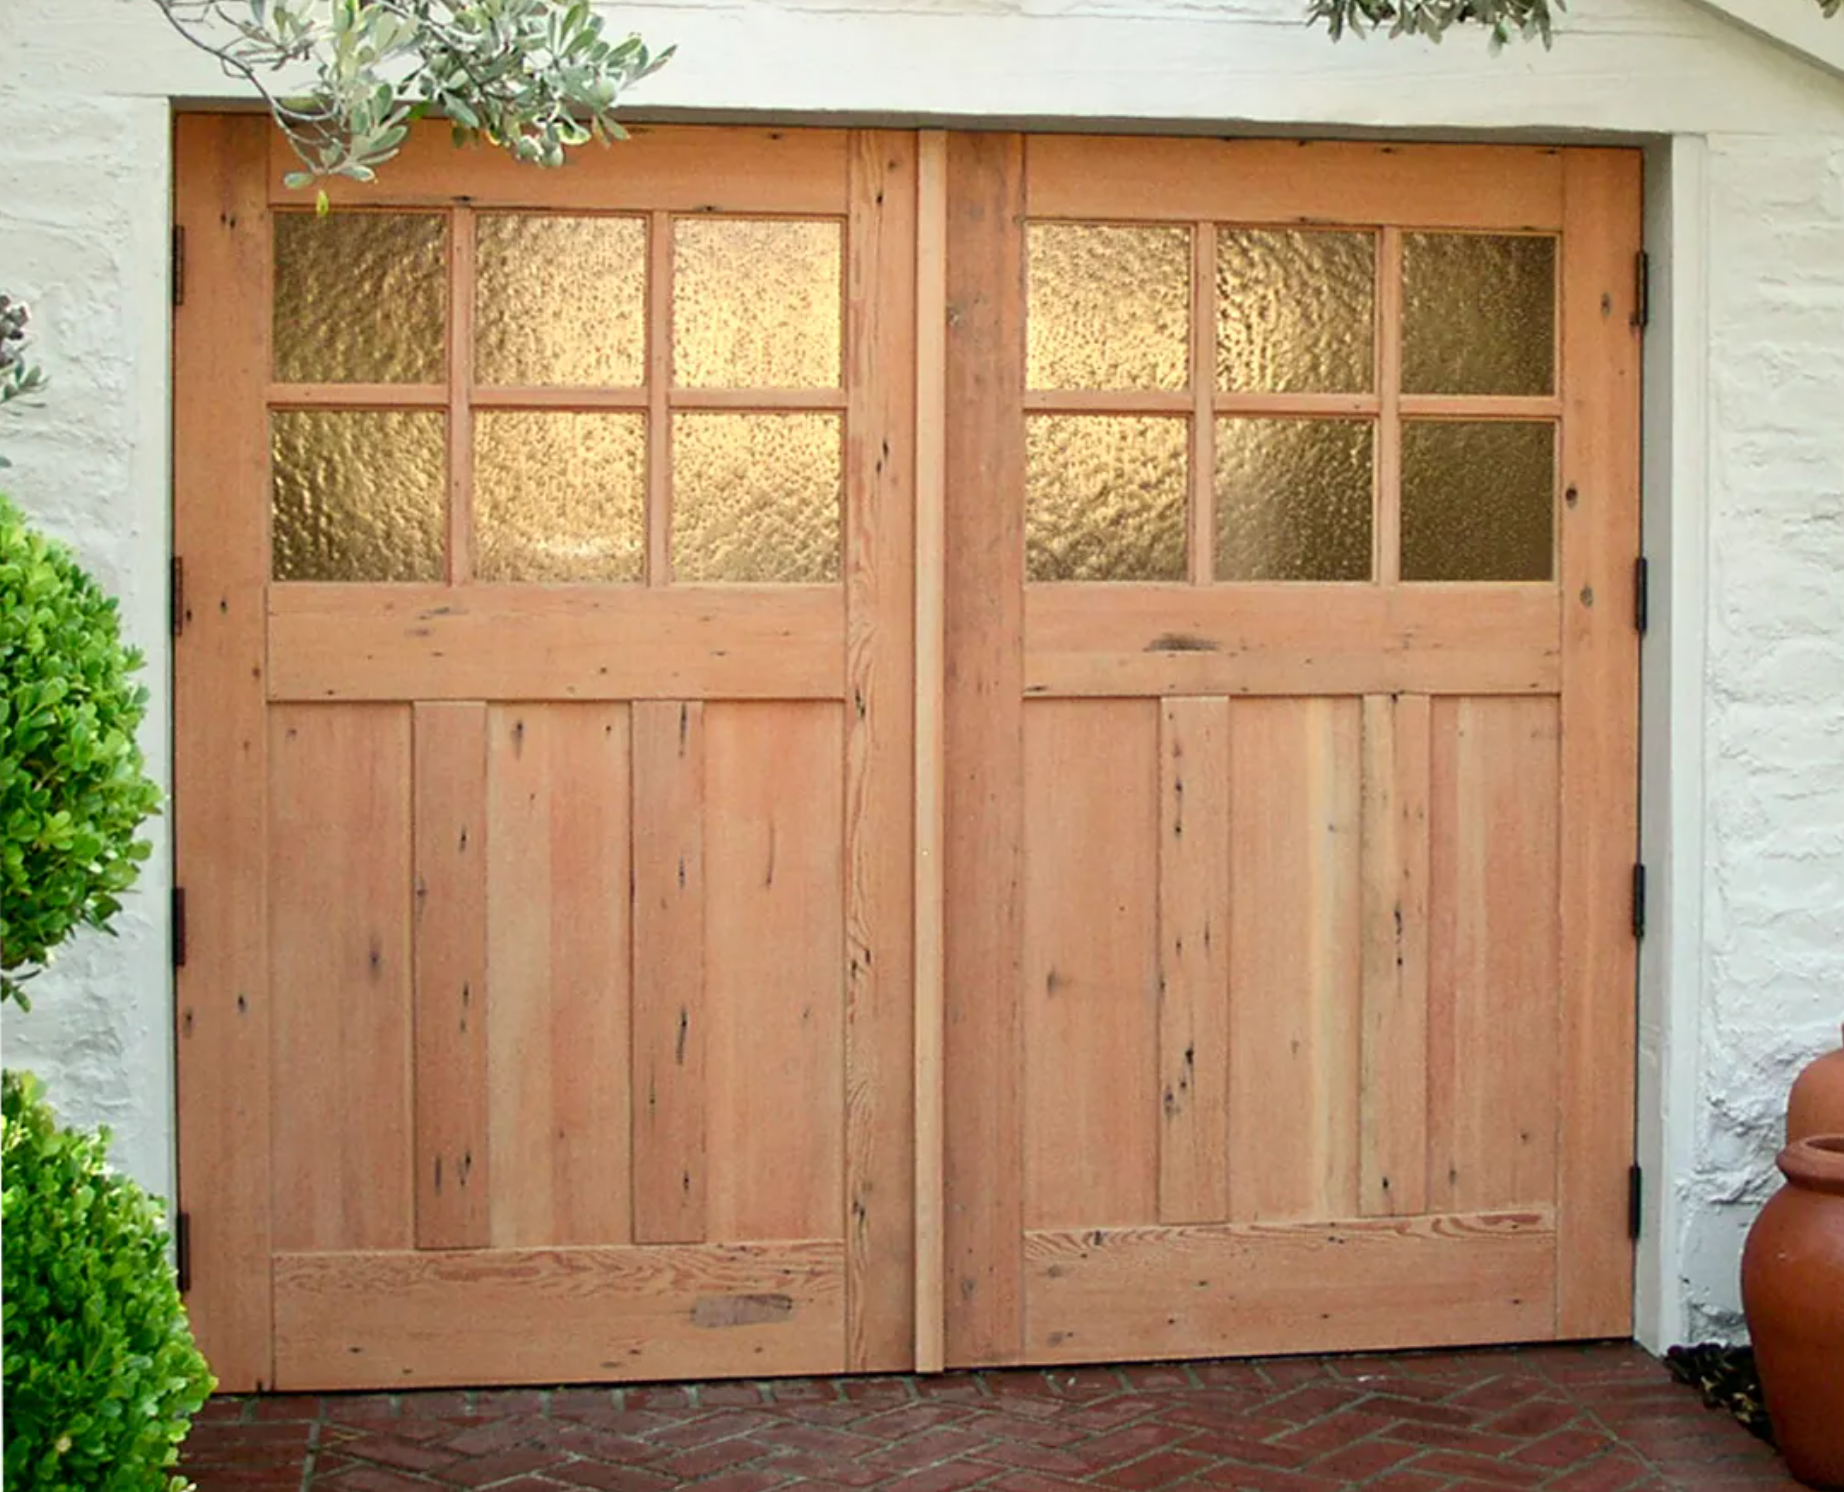 Carriage Doors: 50 Ideas To Inspire Your Next Project - RealCraft